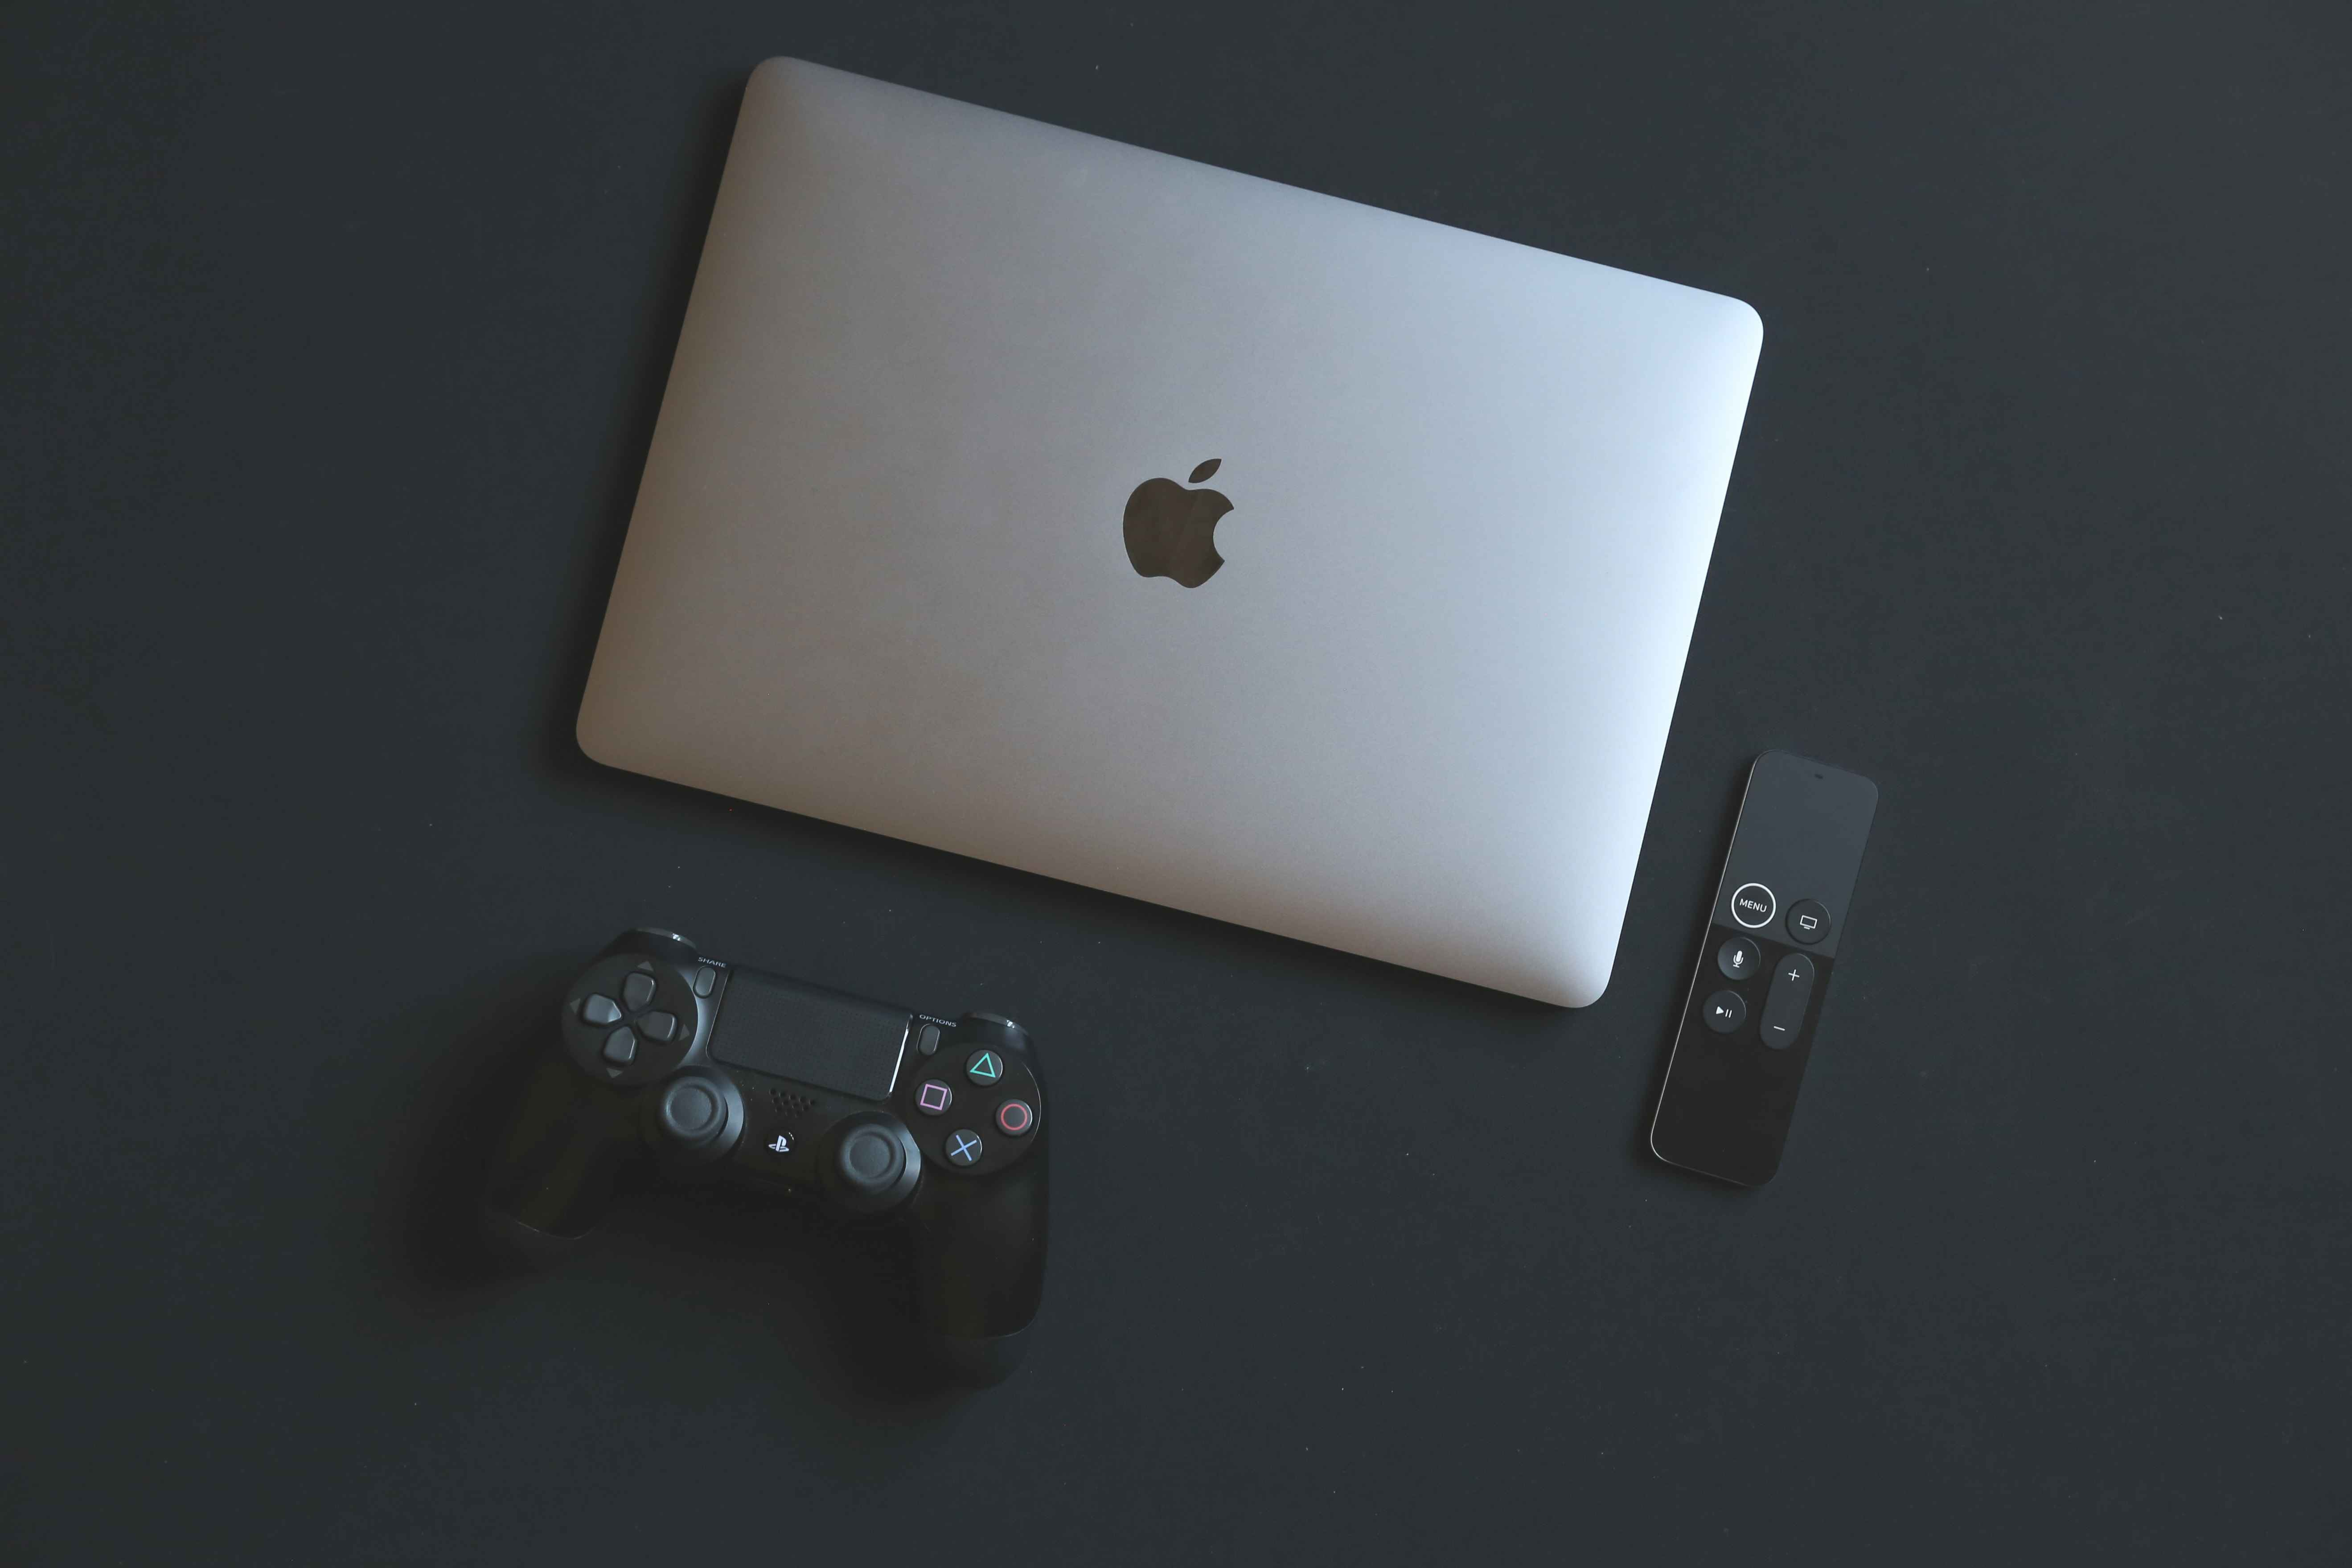 Silence Your Macbook’s Loud Fan: Troubleshooting and Fixes